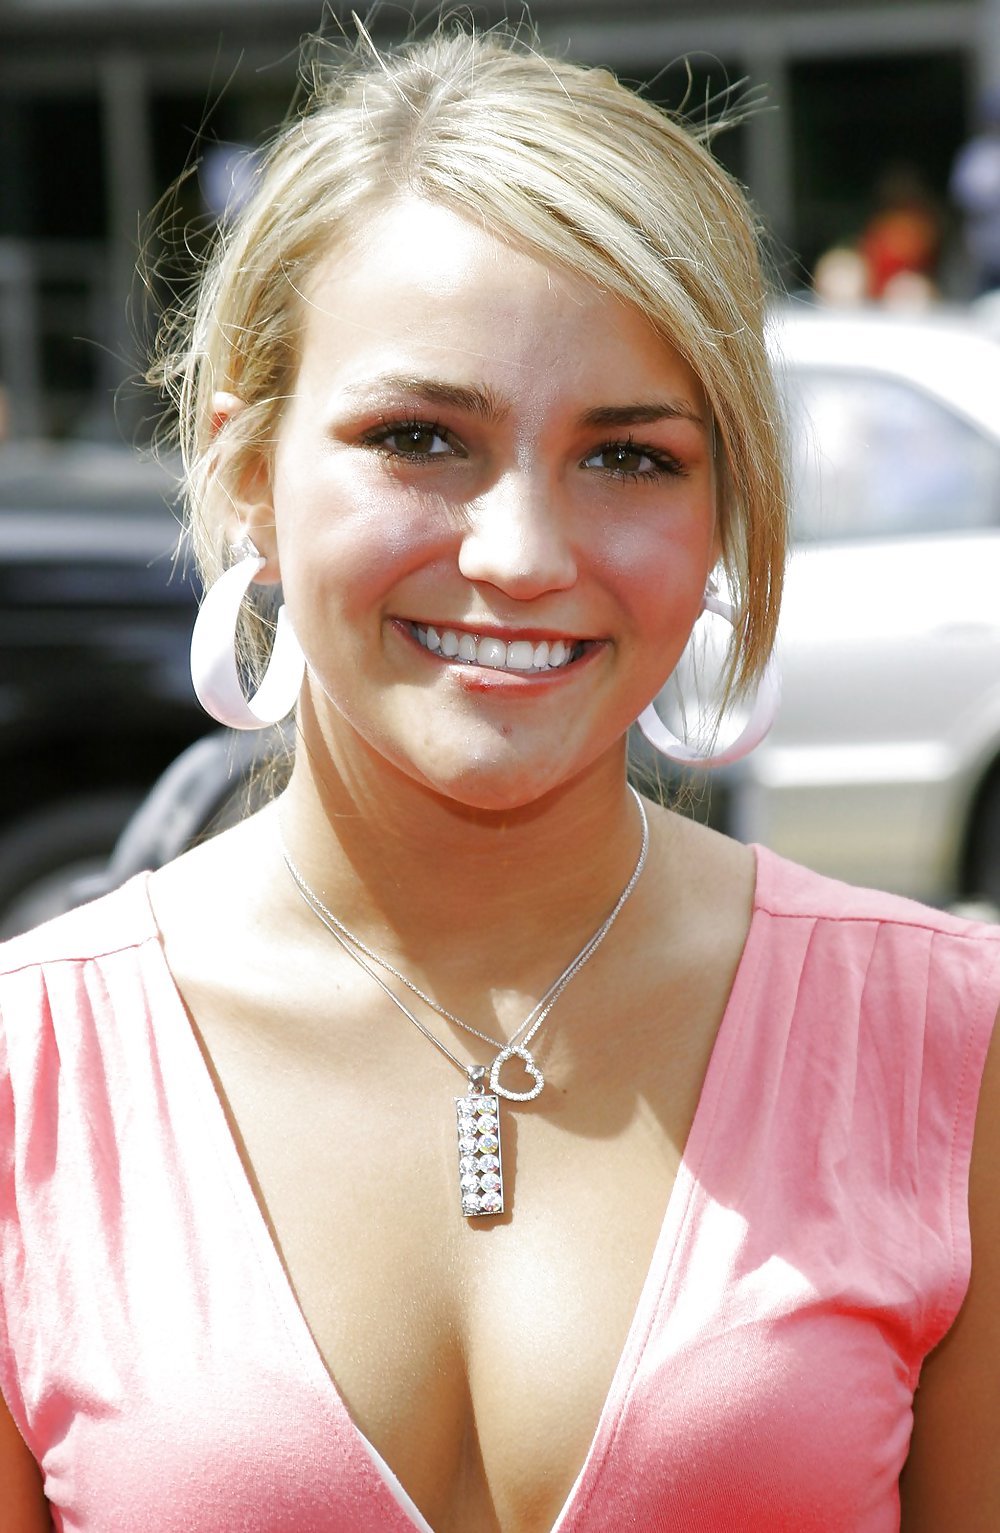 Jamie Lynn Spears Mix Des Images Fakes #22187511